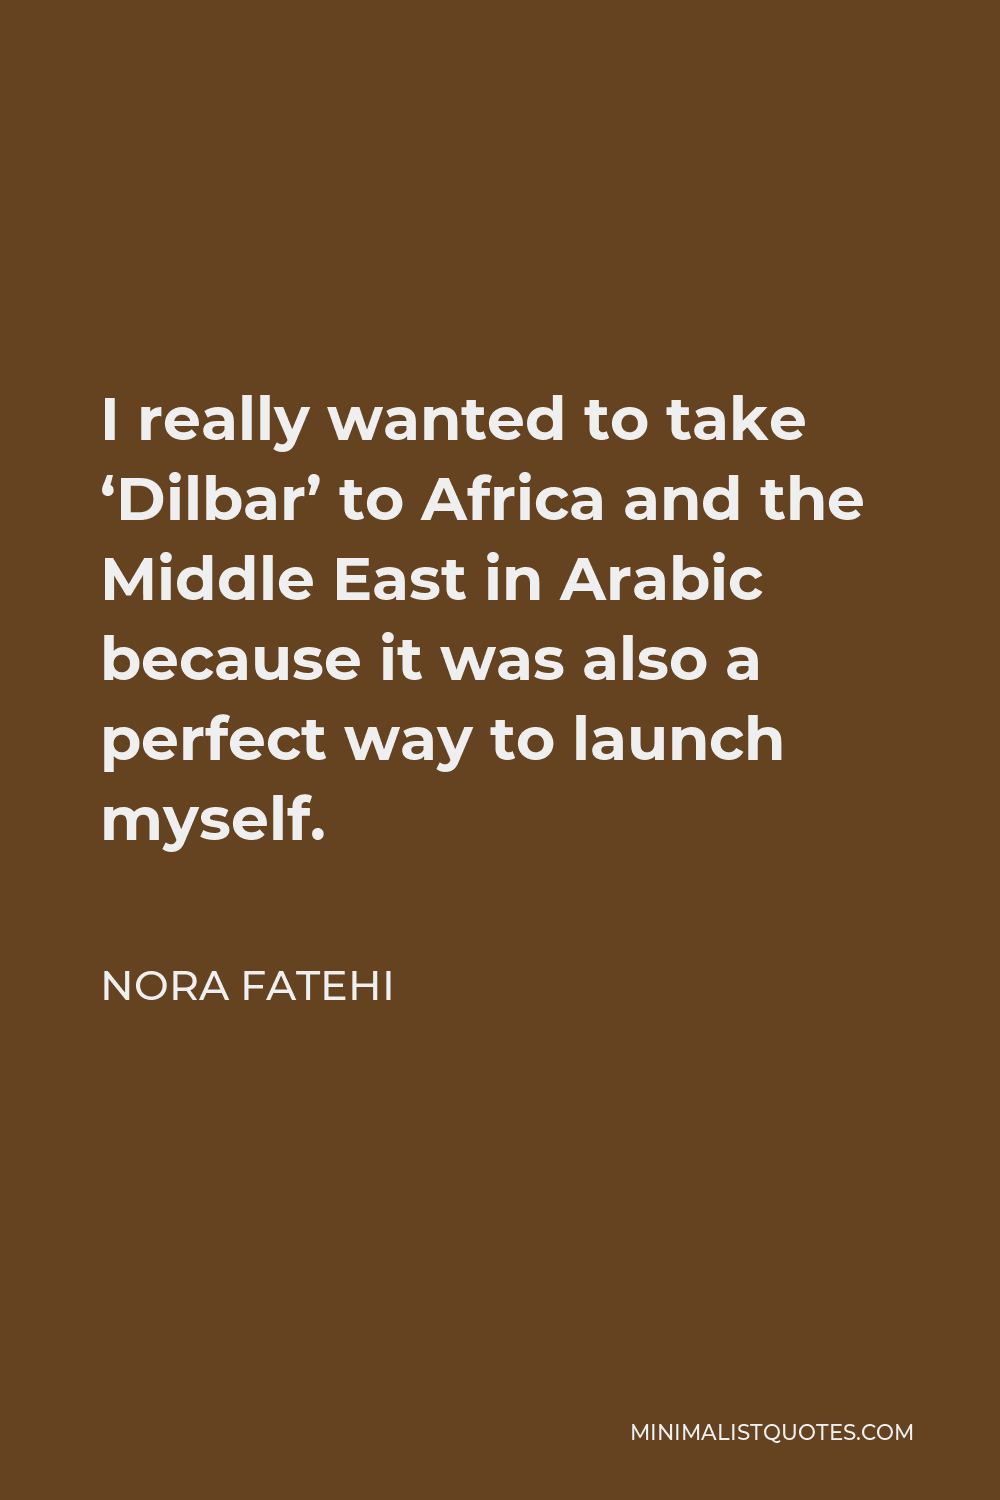 Nora Fatehi Quote - I really wanted to take ‘Dilbar’ to Africa and the Middle East in Arabic because it was also a perfect way to launch myself.